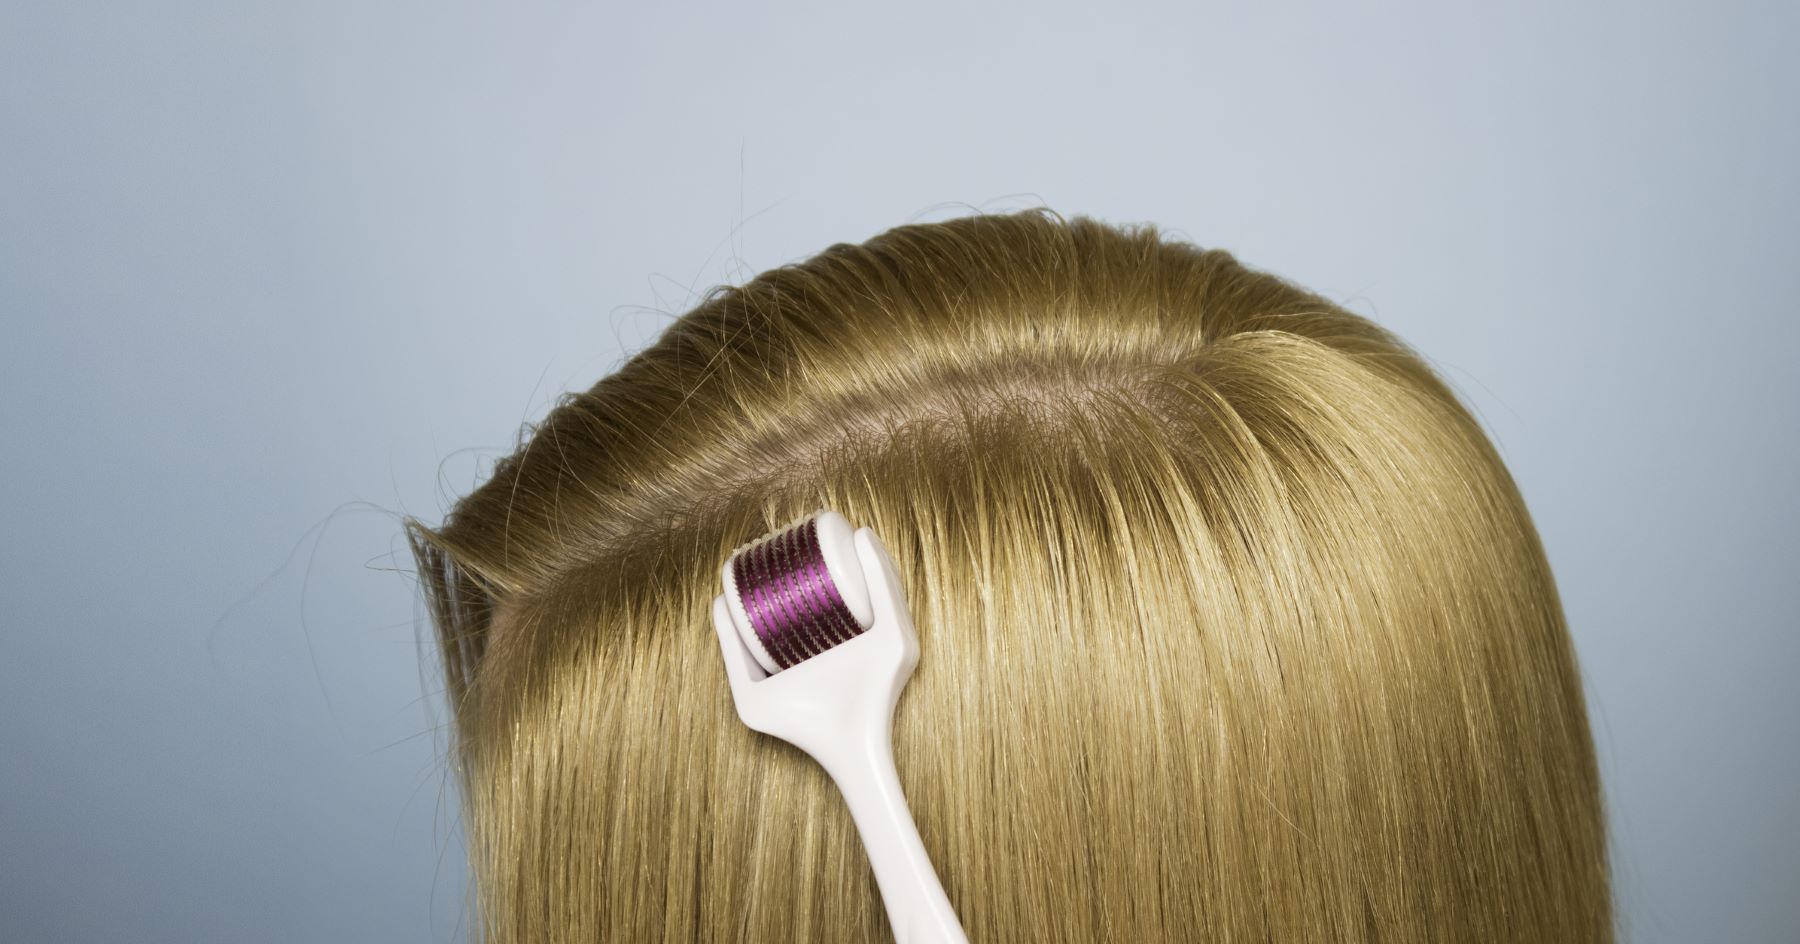 Derma-rolling for hair growth